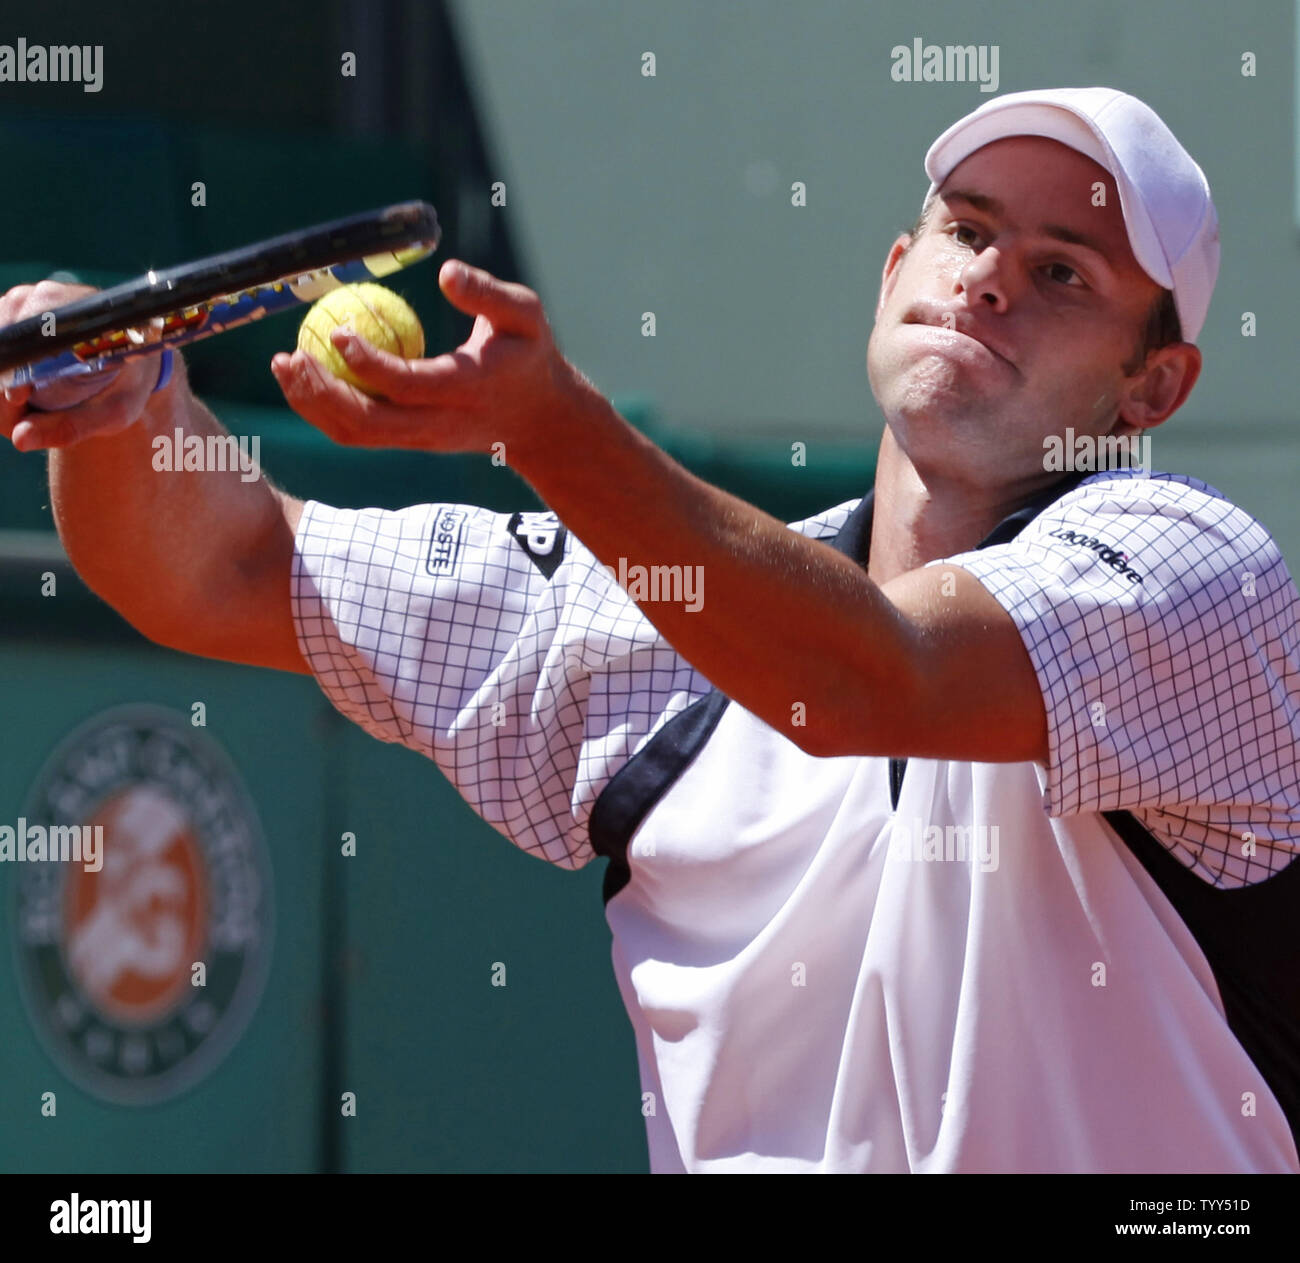 American Andy Roddick prepares to serve during his French Open third-round match against Frenchman Marc Gicquel at Roland Garros in Paris on May 30, 2009.  Roddick defeated Gicquel 6-1, 6-4, 6-4.   (UPI Photo/ David Silpa) Stock Photo